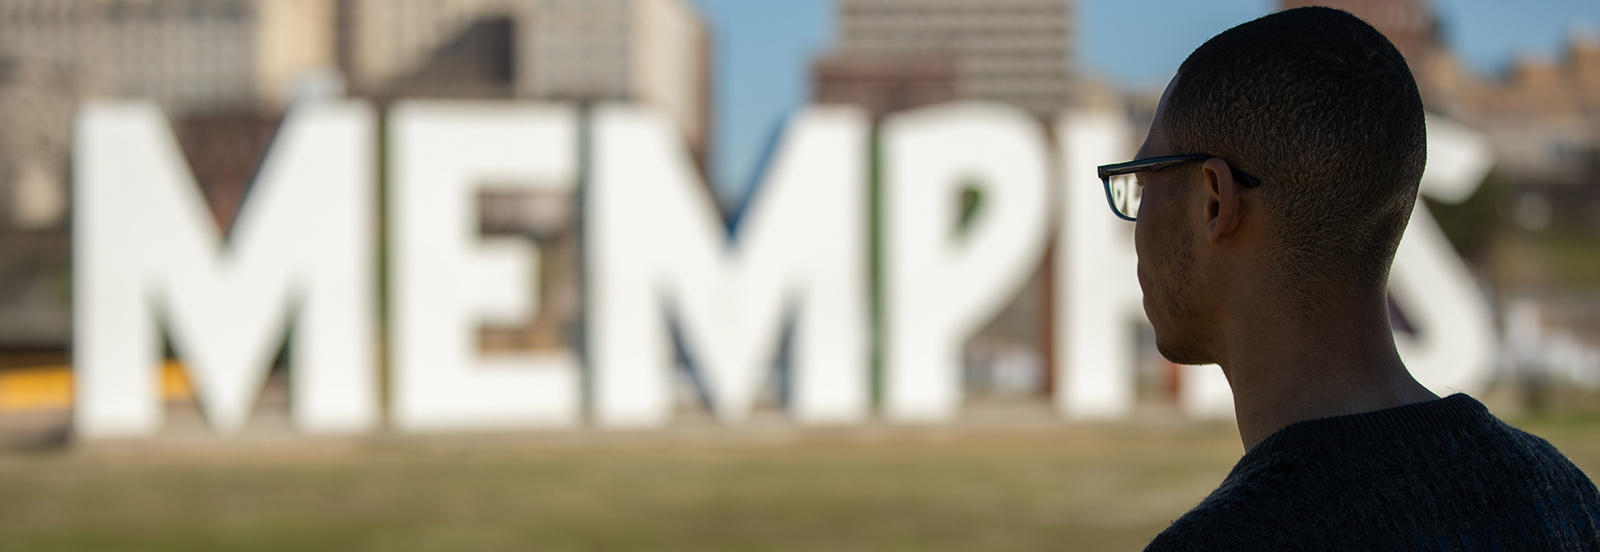 large letters spelling MEMPHIS in background with back of student in foreground